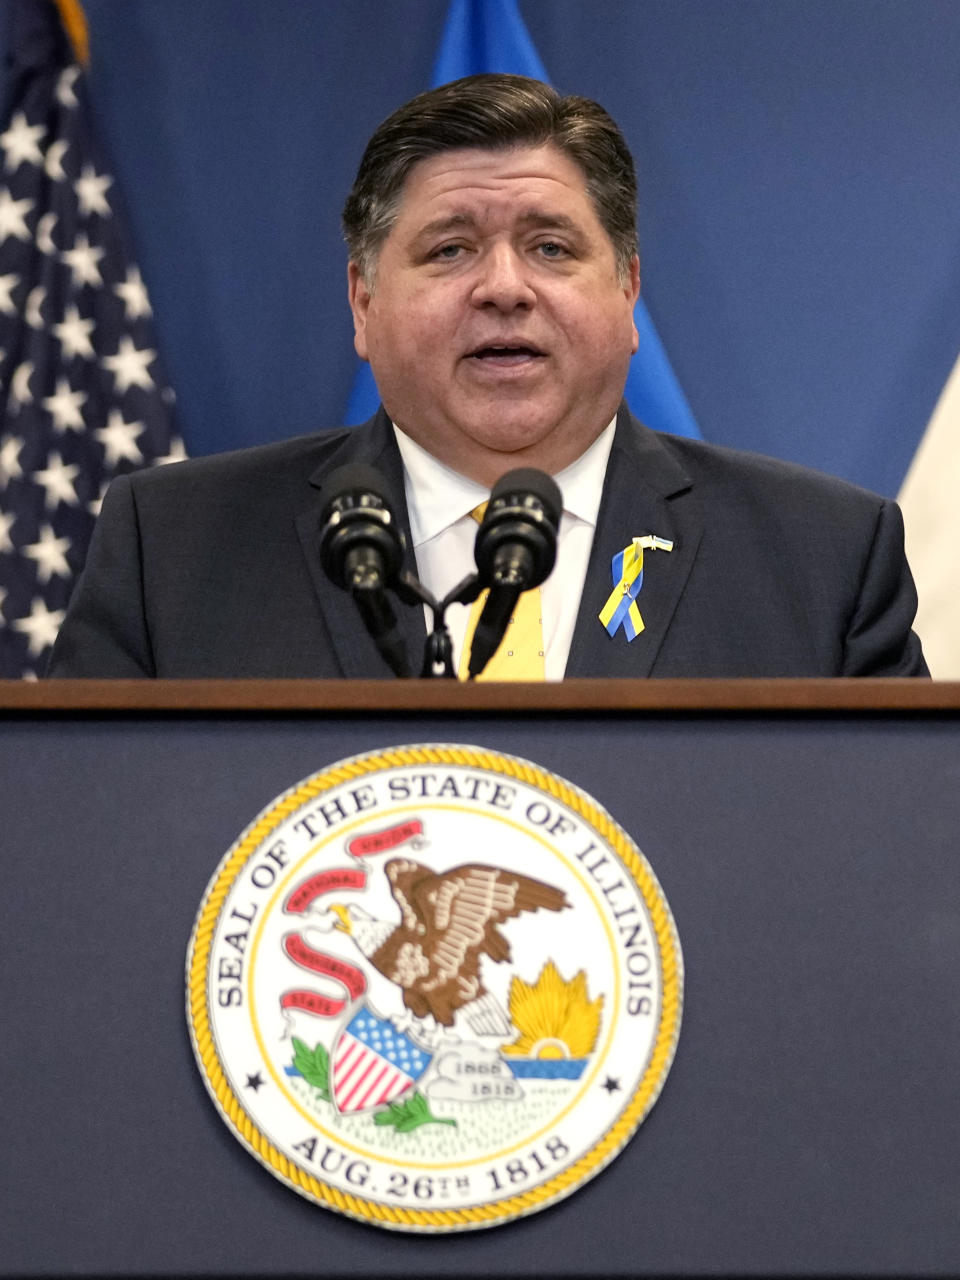 Illinois Gov. J.B. Pritzker speaks at a news conference in Chicago, Tuesday, April 16, 2024. Ukrainian Prime Minister Denys Shmyhal, Illinois Governor Pritzker, and U.S. Special Representative for Ukraine's Economic Recovery Penny Pritzker delivered joint remarks recognizing the Illinois-Ukraine partnership. (AP Photo/Nam Y. Huh)